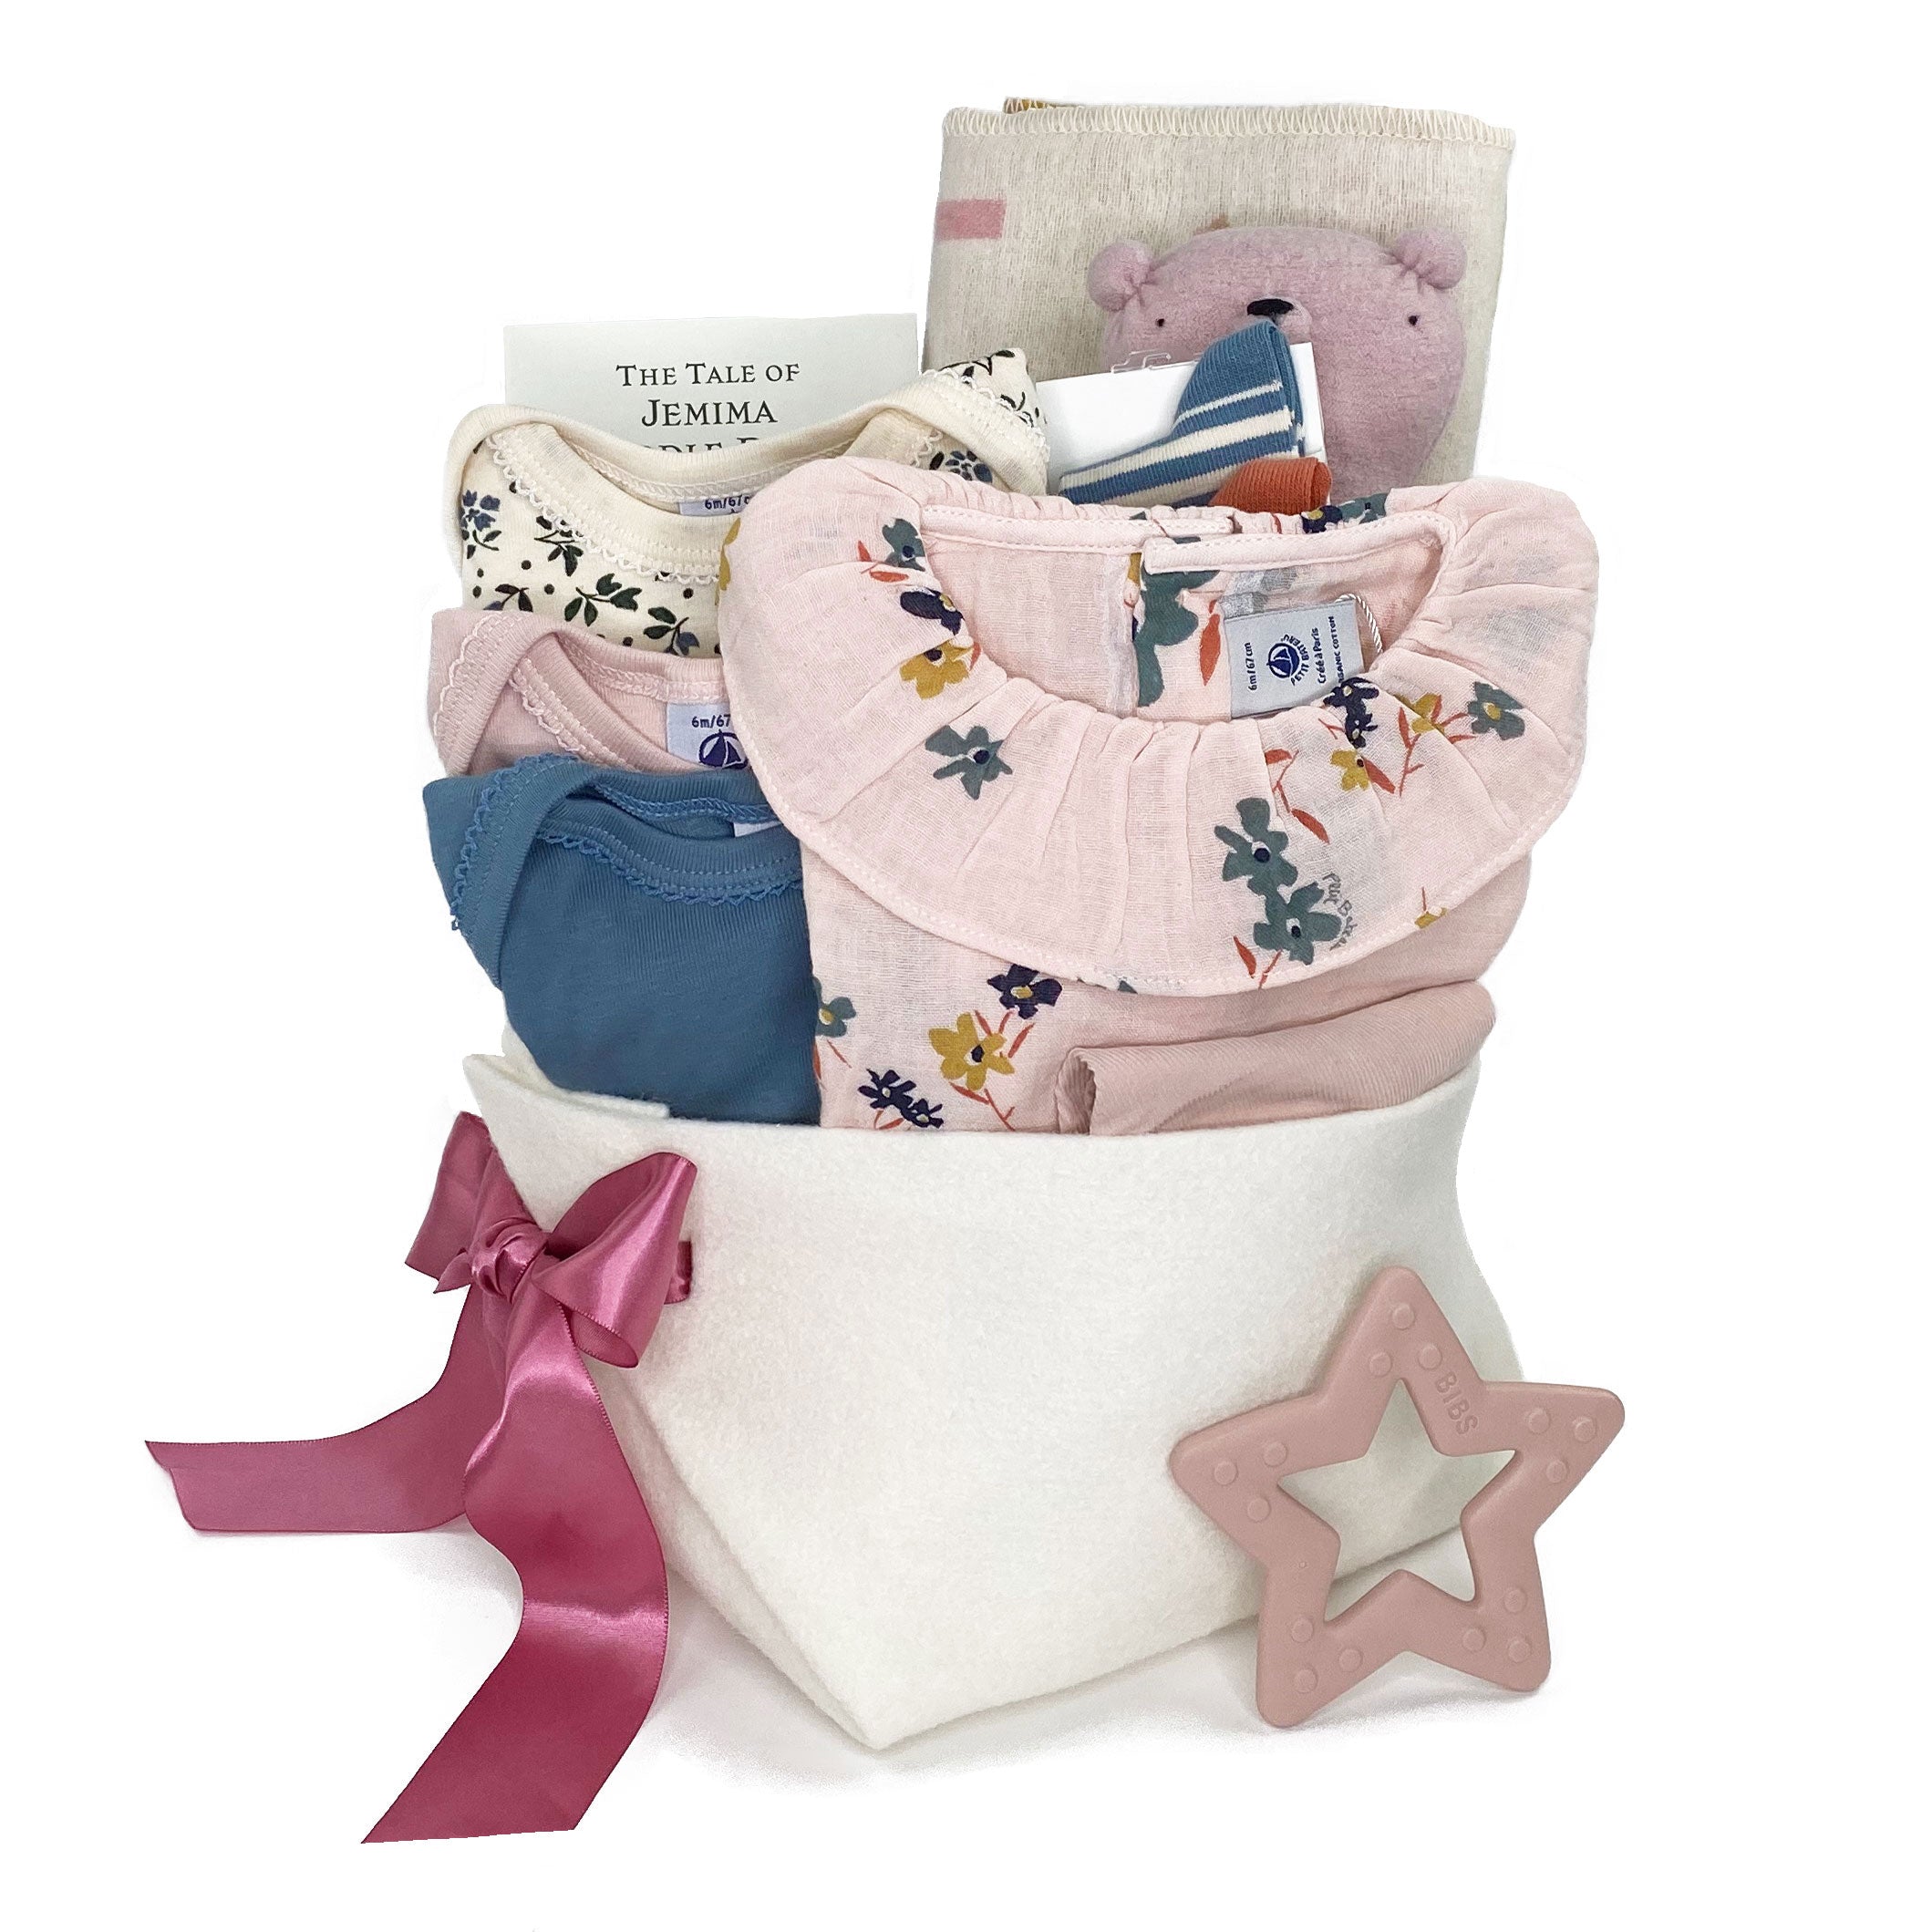 Premium Baby Girl Gift Basket featuring Petit Bateau and curated baby gifts at Bonjour Baby Baskets